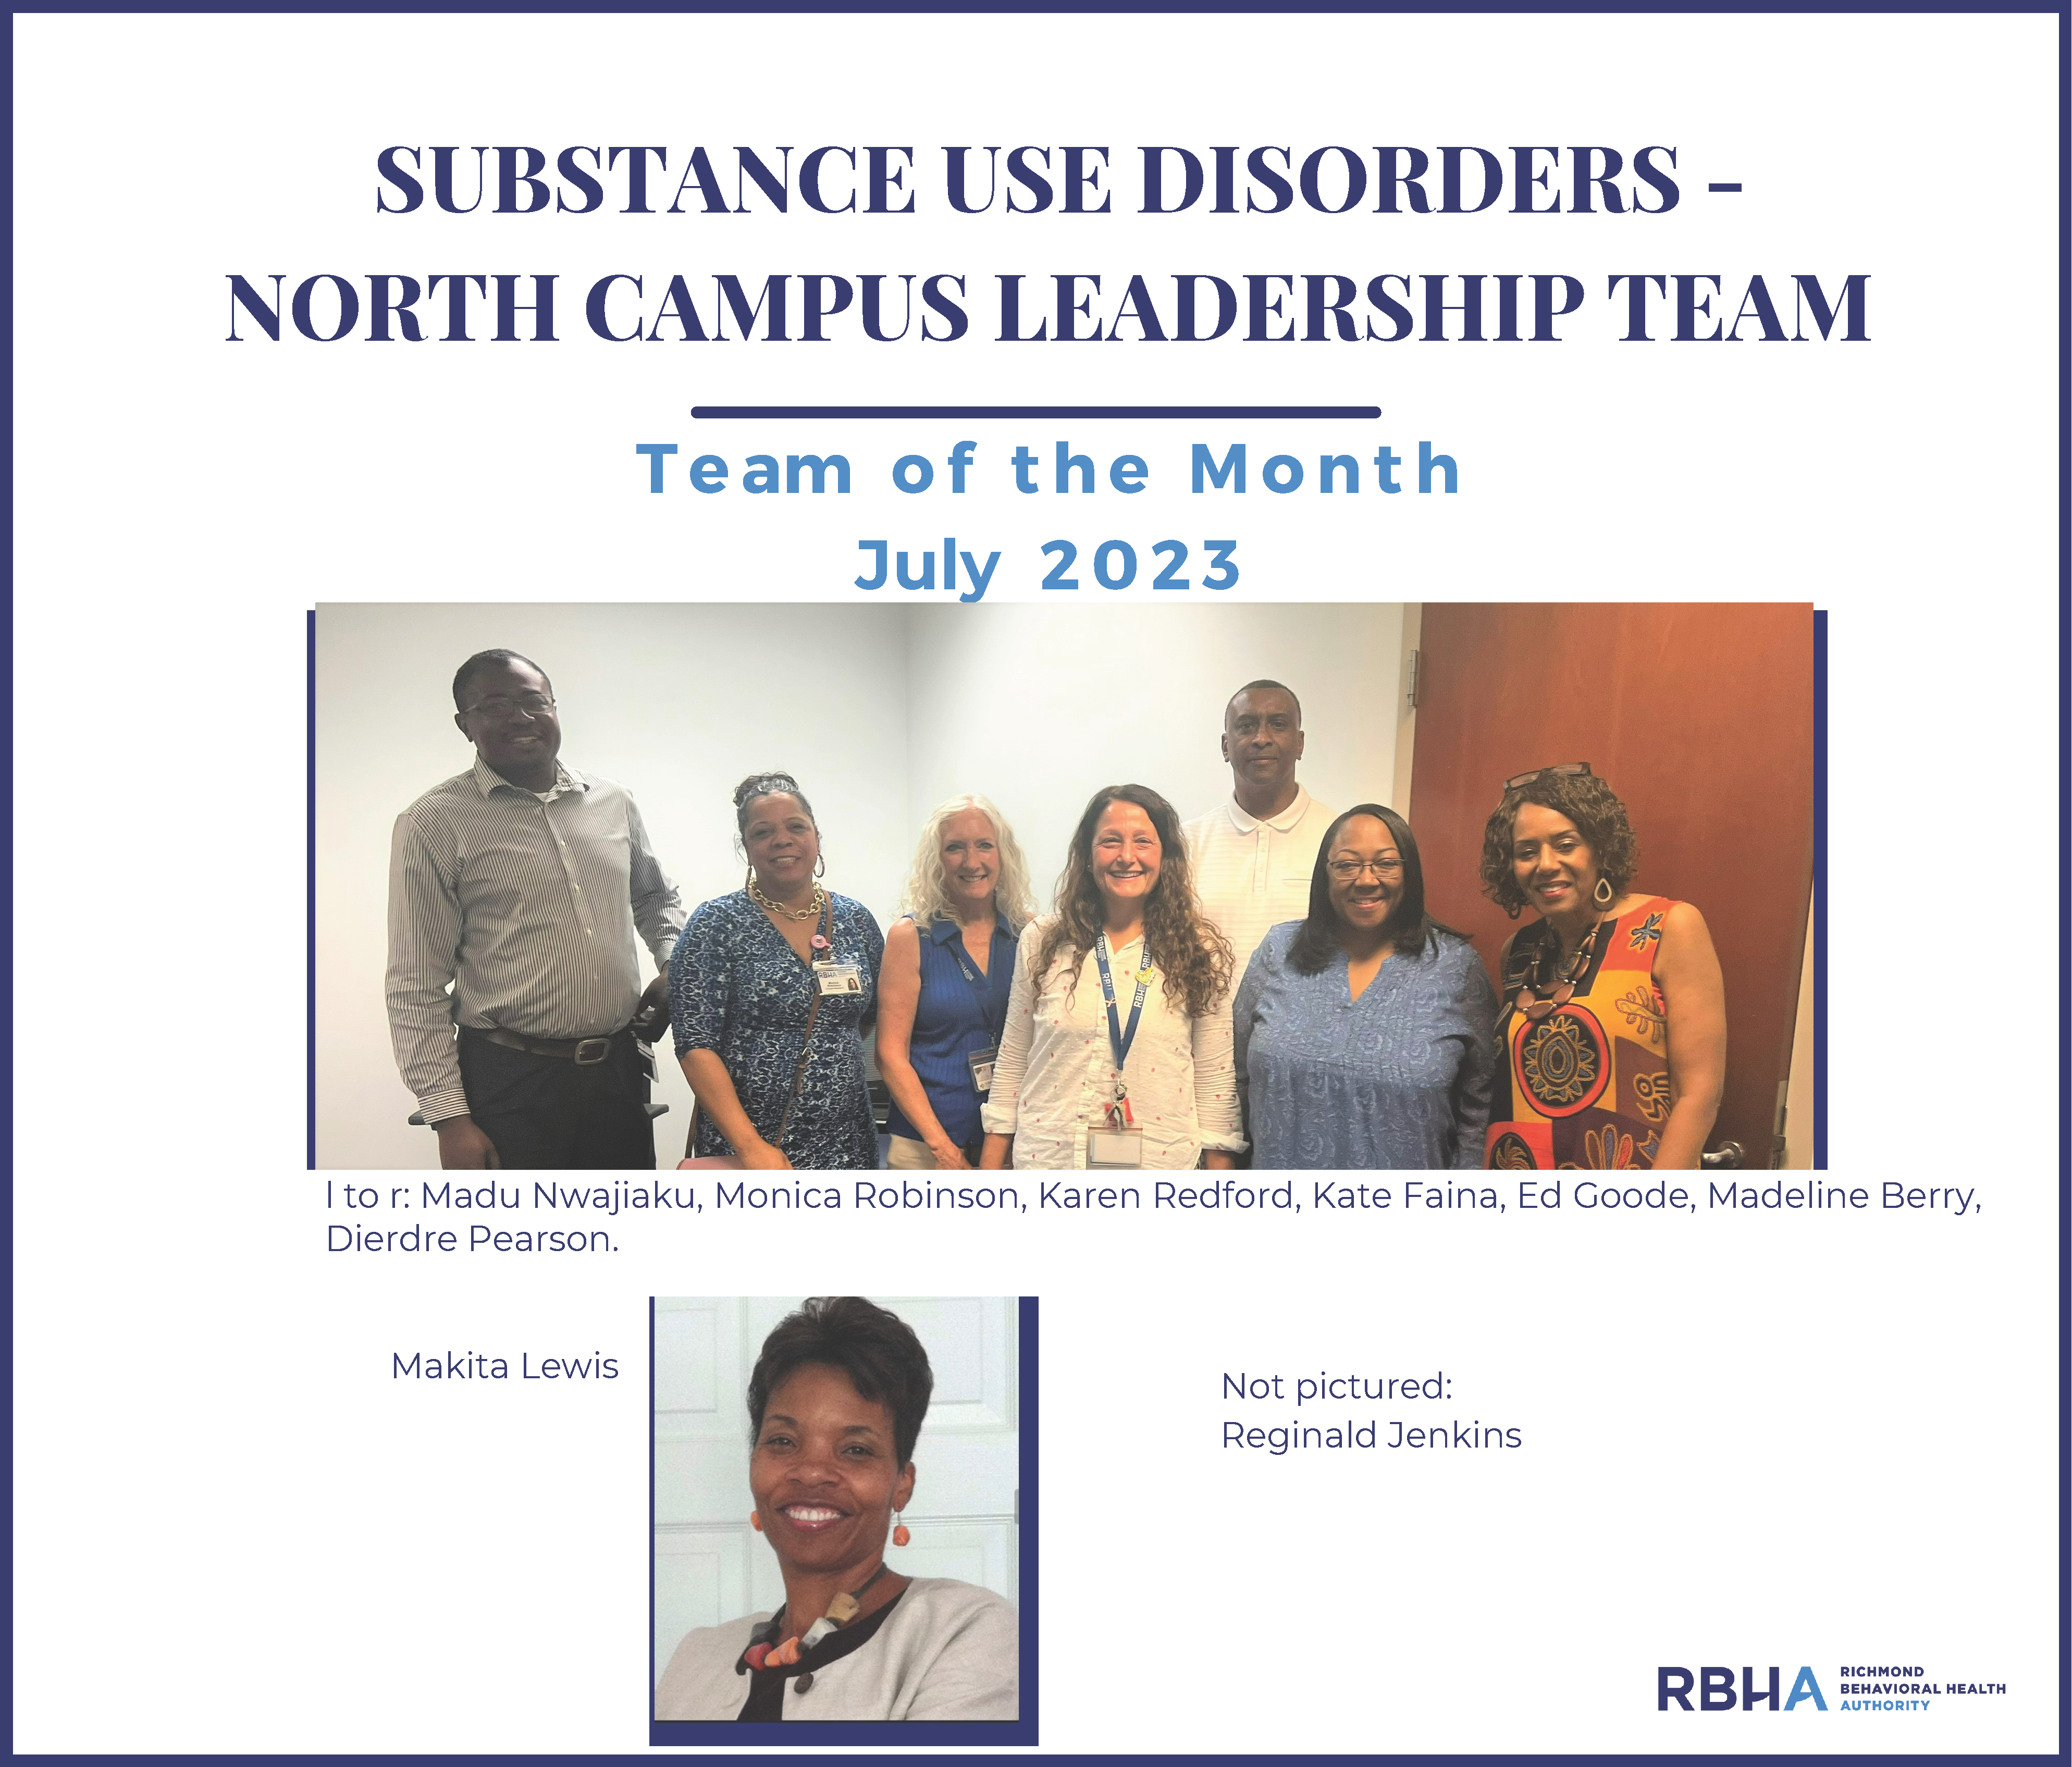 Substance Use Disorders - North Campus Leadership Team